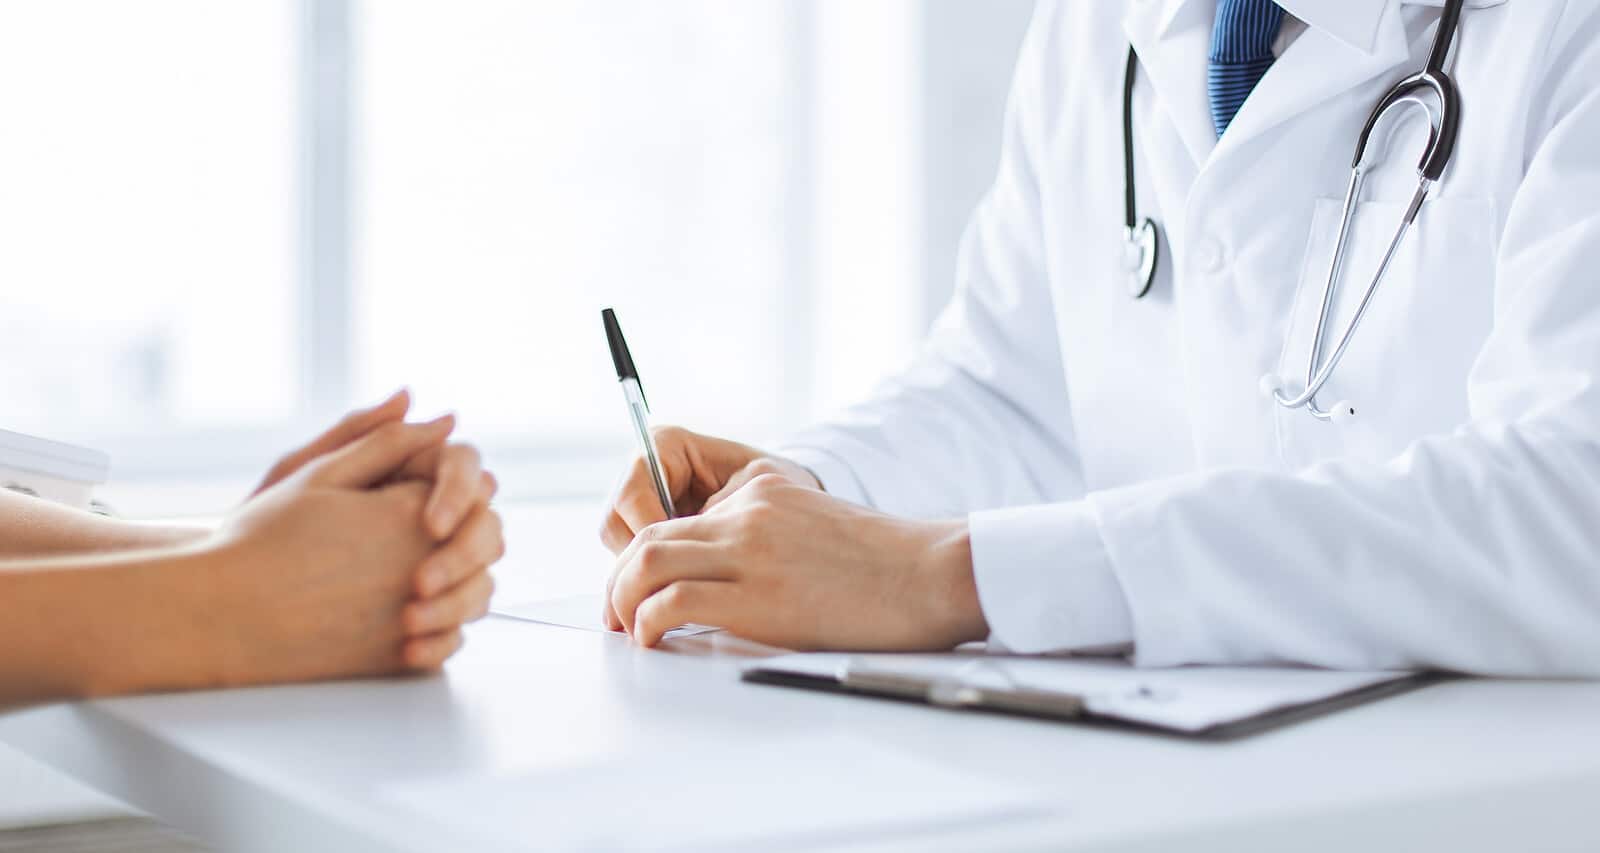 A doctor sits with a patient at a desk. Are you looking for SEO success for functional medicine doctors? We can help you maximize on your healthcare SEO keywords and healthcare SEO strategies today!